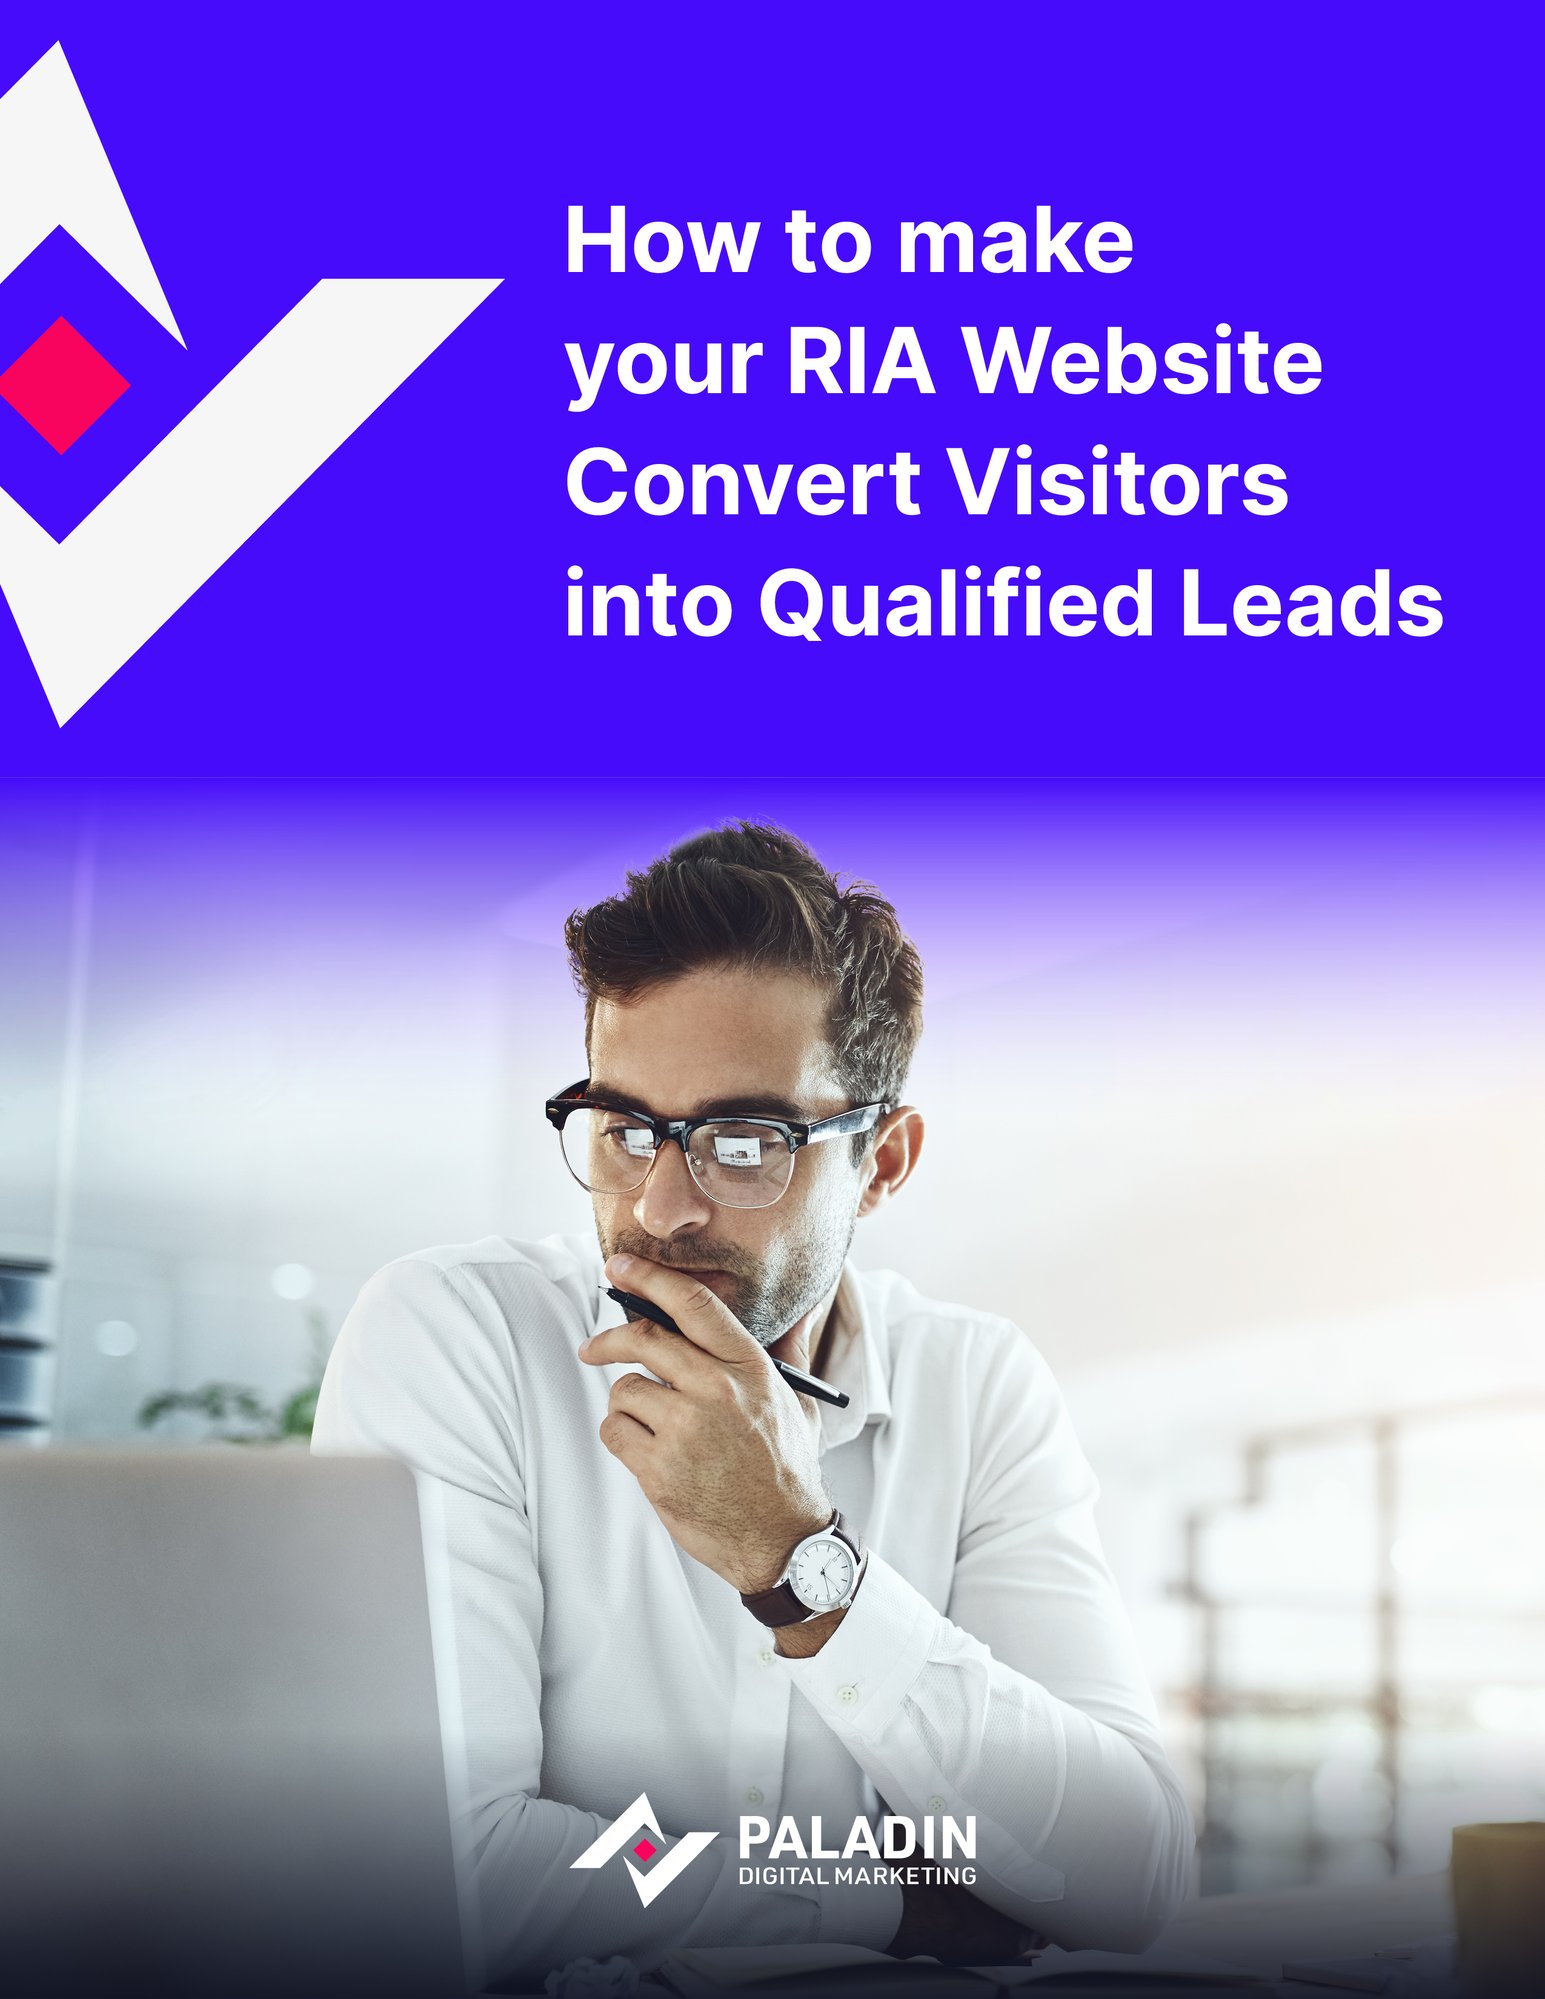 How to make your RIA website convert